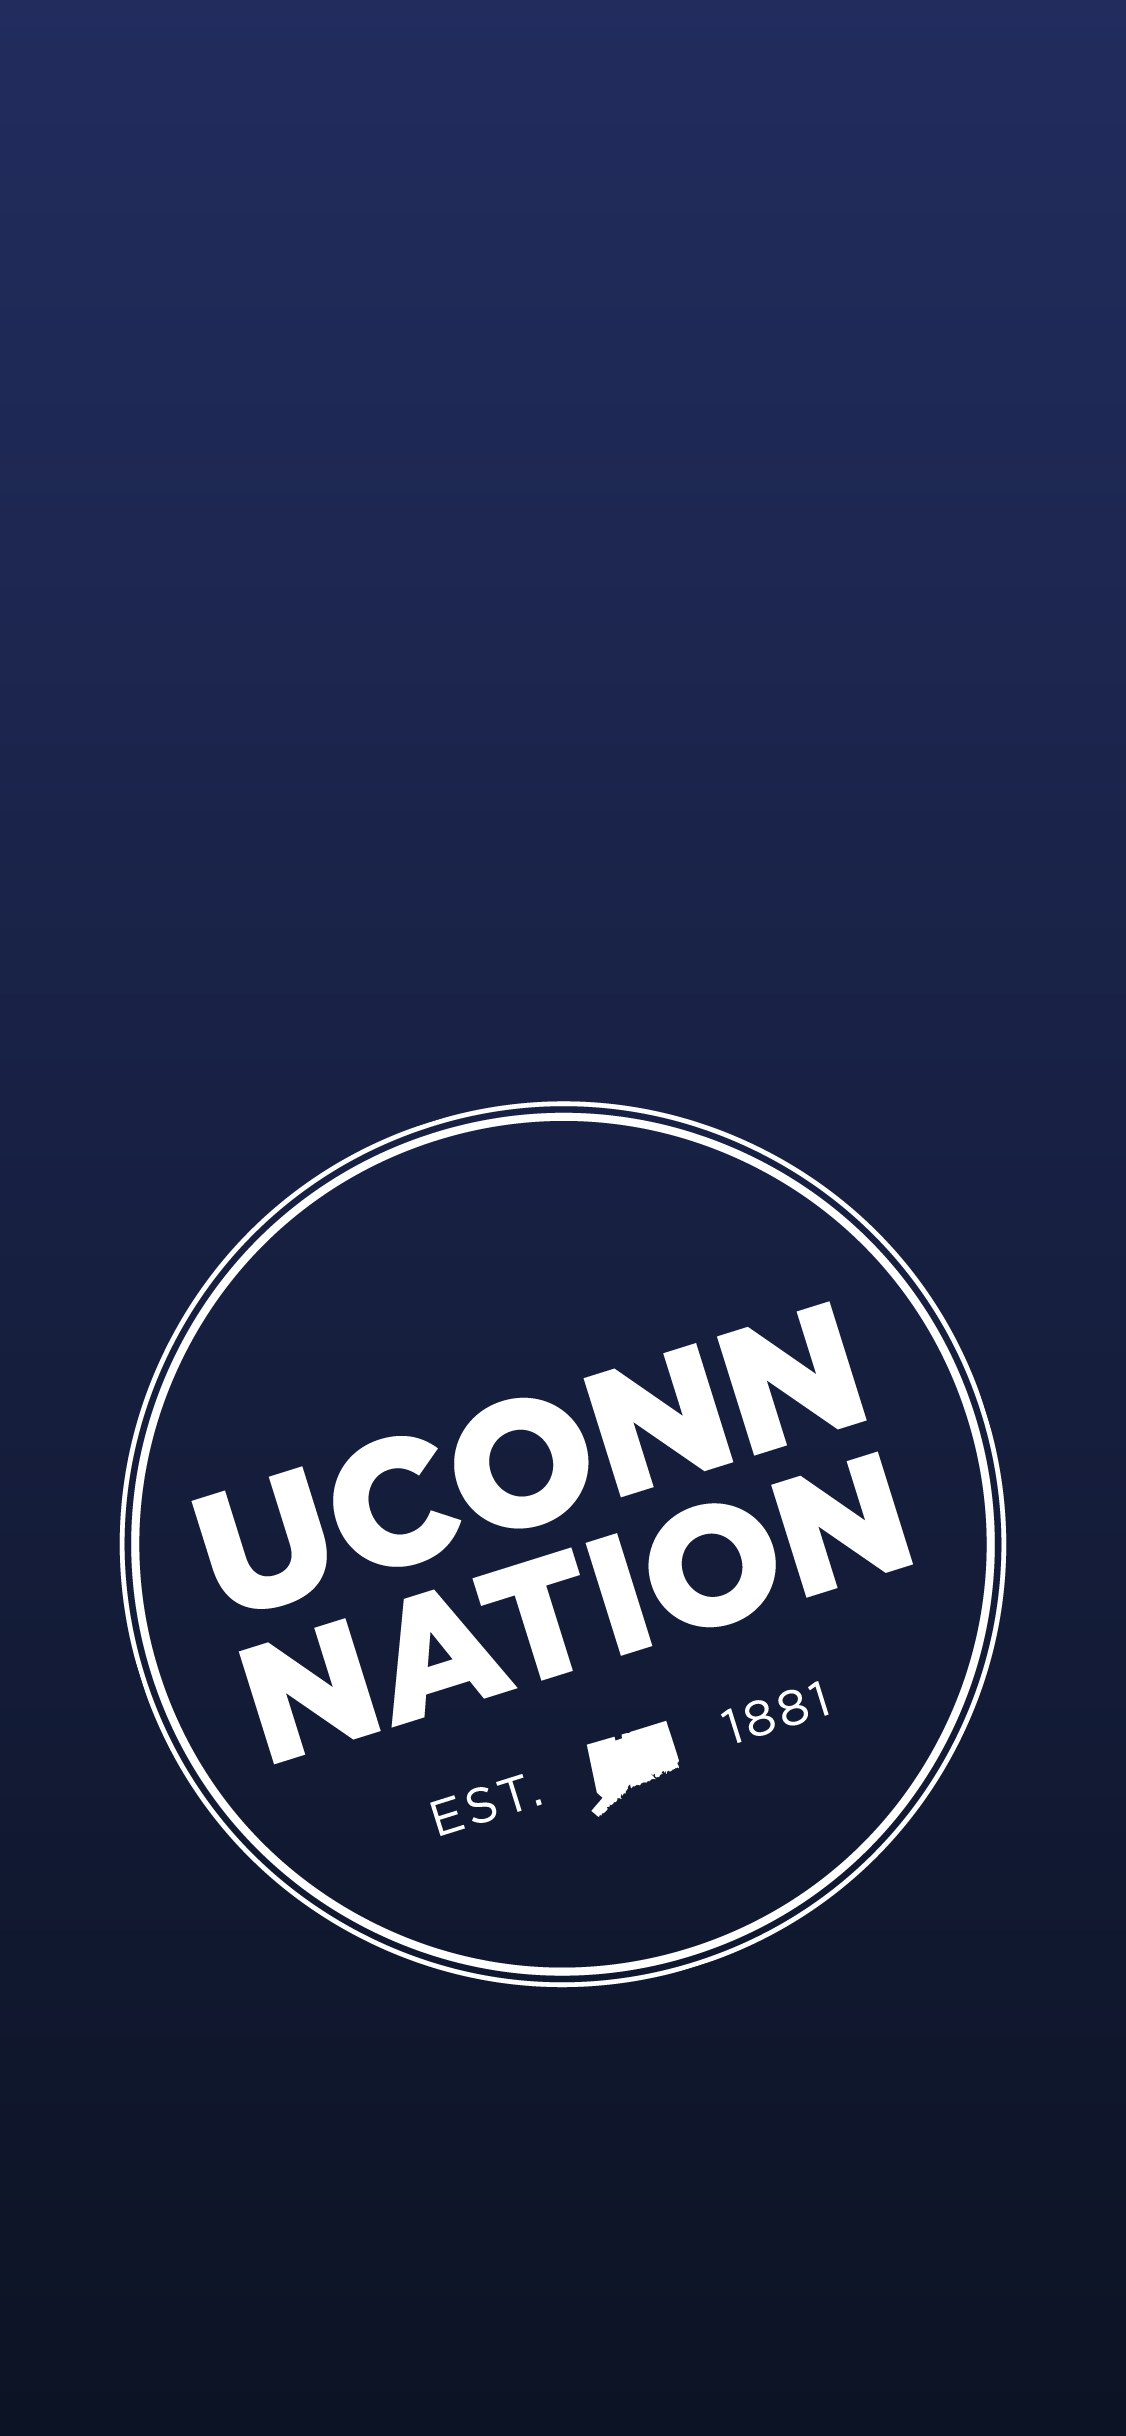 Download wallpapers UConn Huskies 4k american football team NCAA blue  white stone USA asphalt texture american football UConn Huskies logo  for desktop with resolution 3840x2400 High Quality HD pictures wallpapers